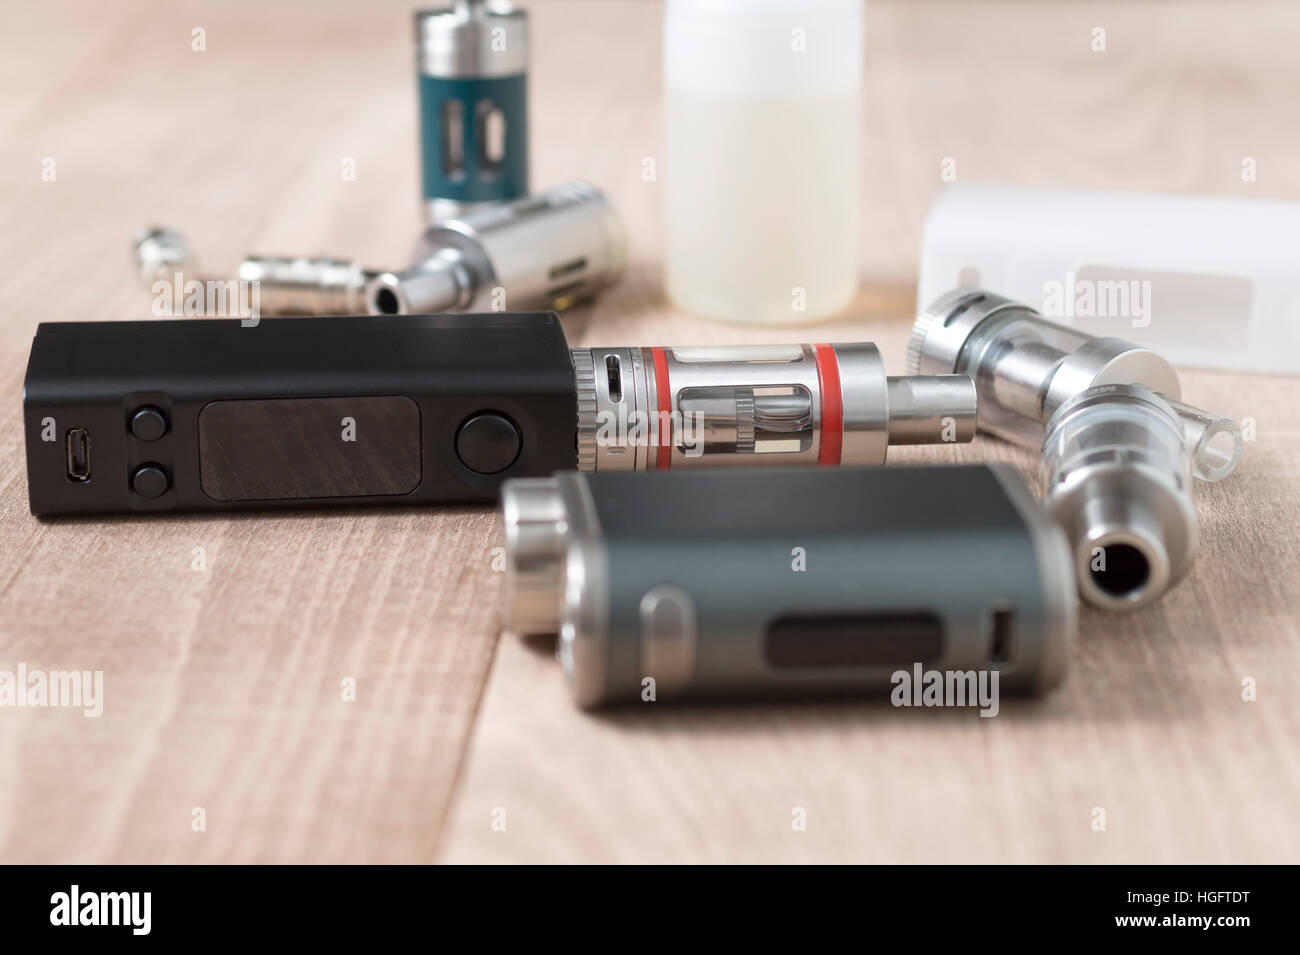 Advanced vaping device, e-cigarette on the table.Close up Stock Photo